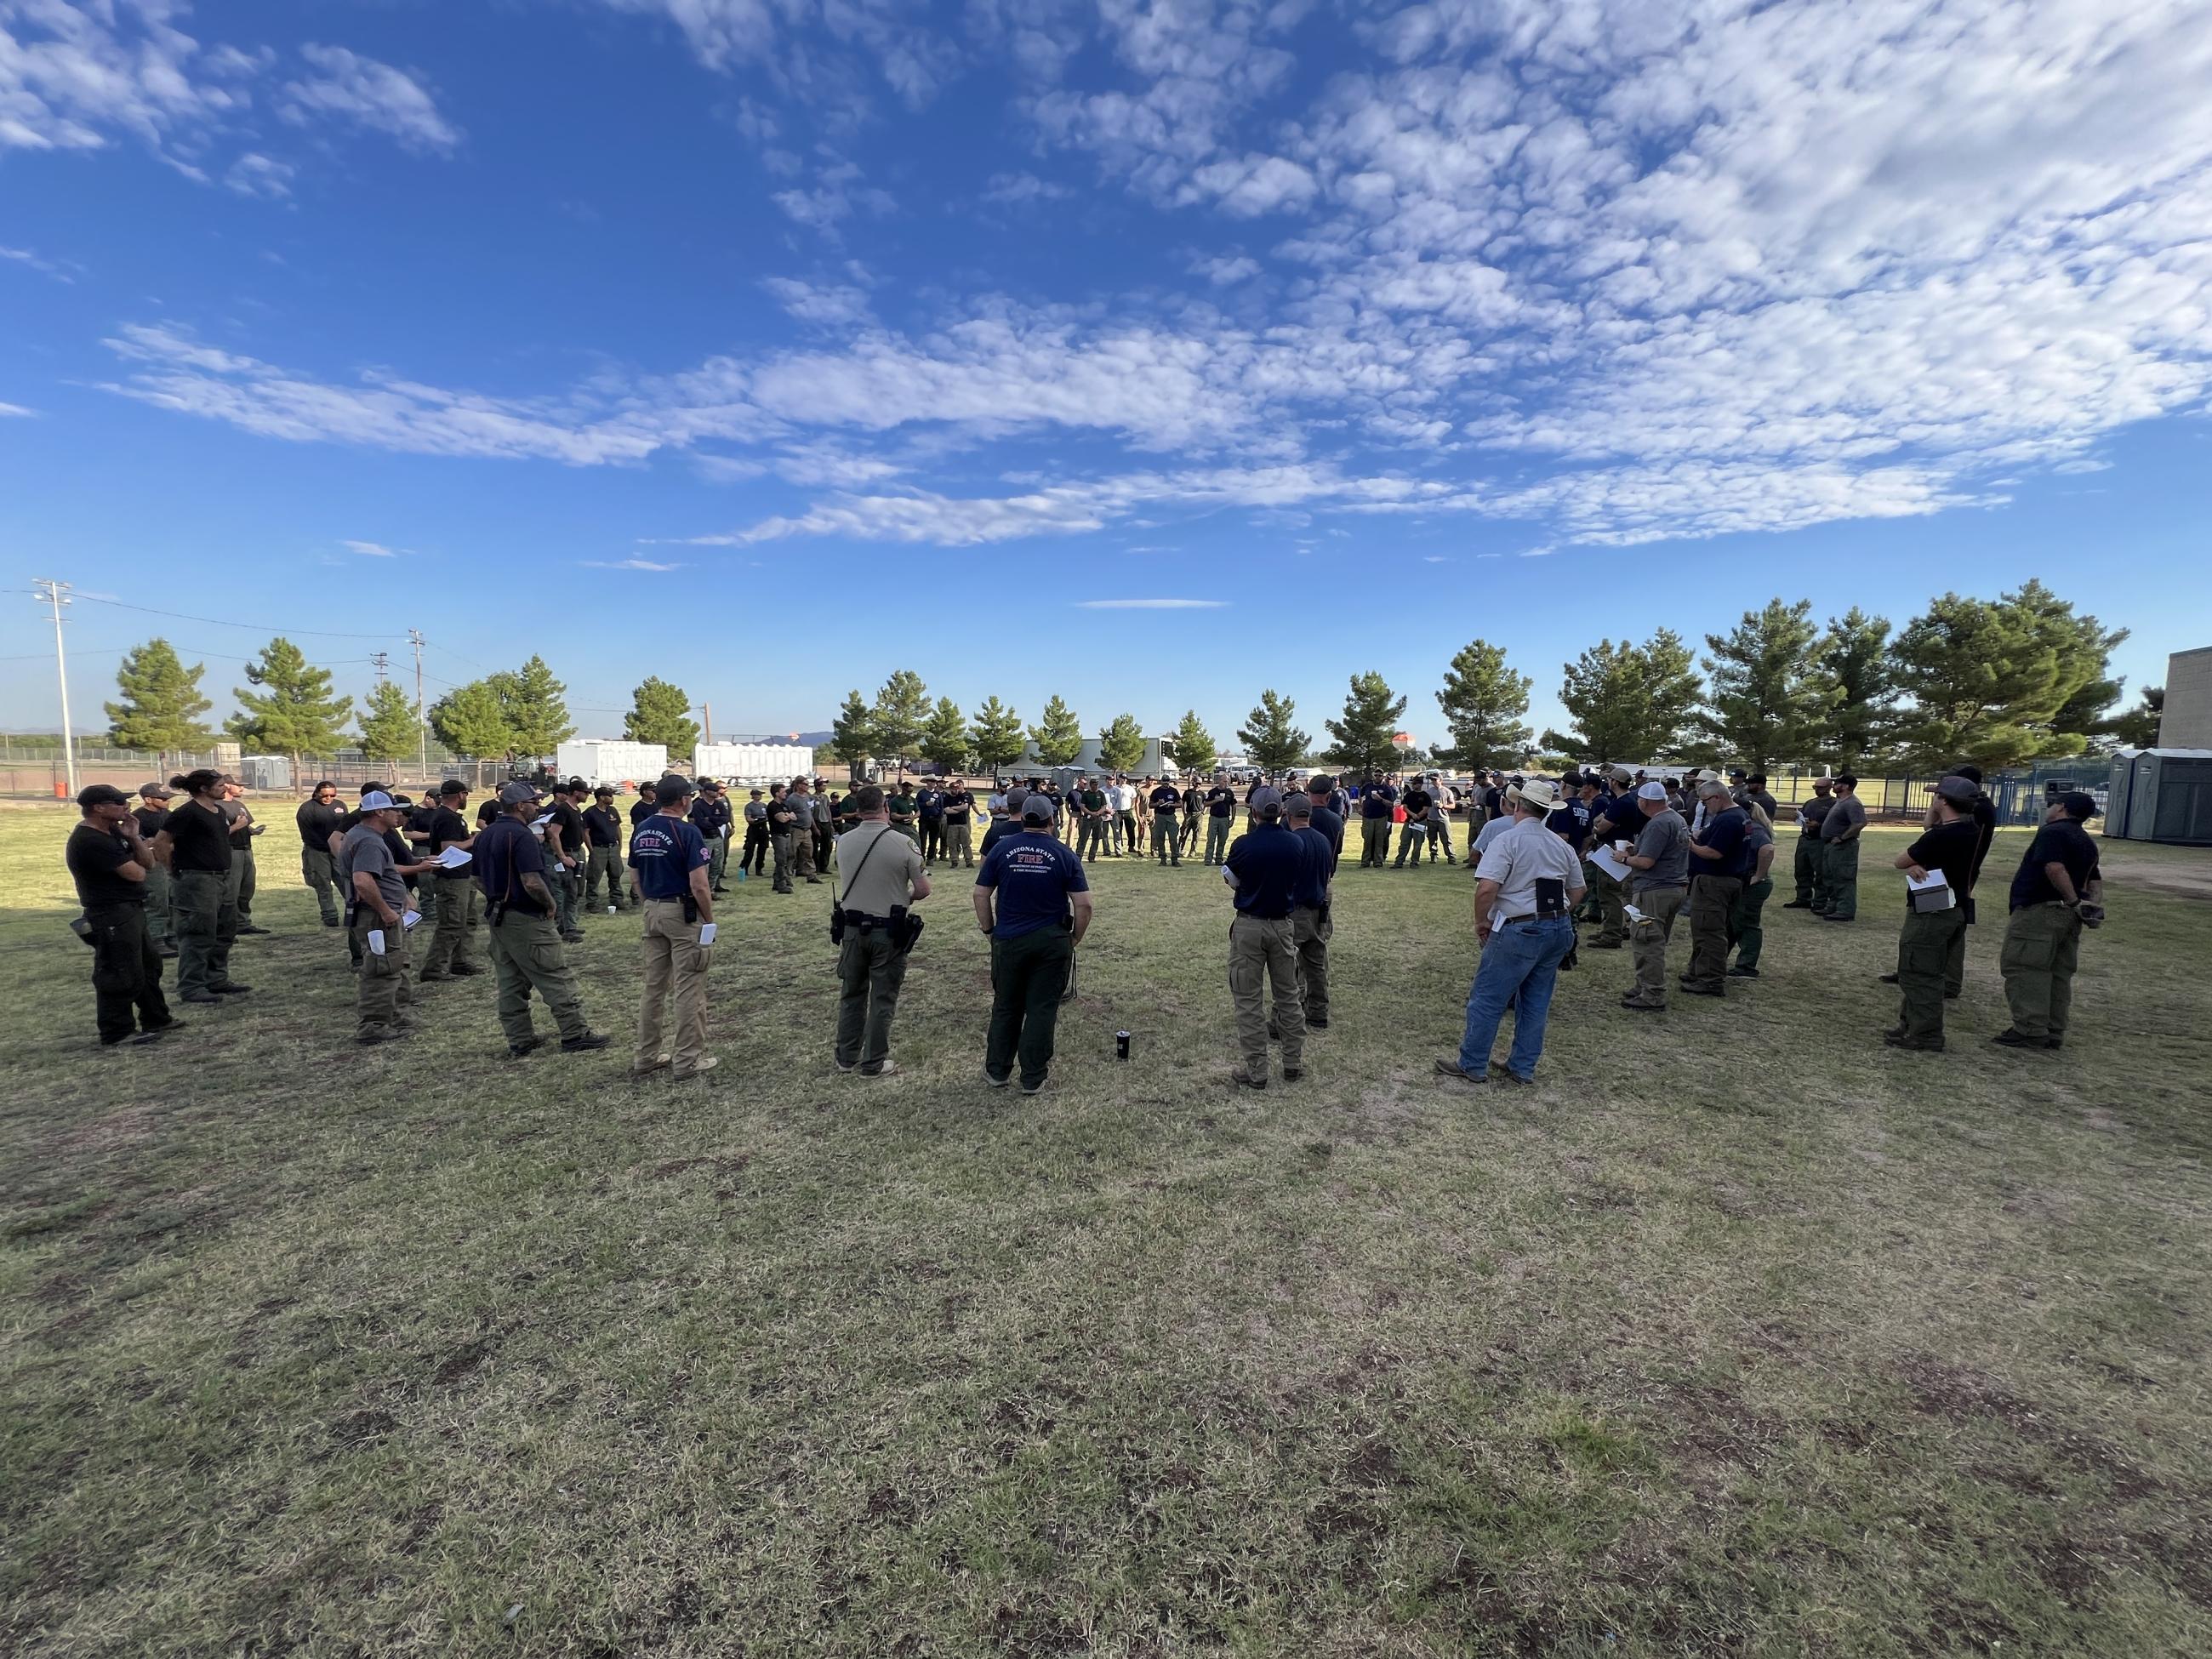 A couple dozen people stand in a circle on grassy field to get an update on operations